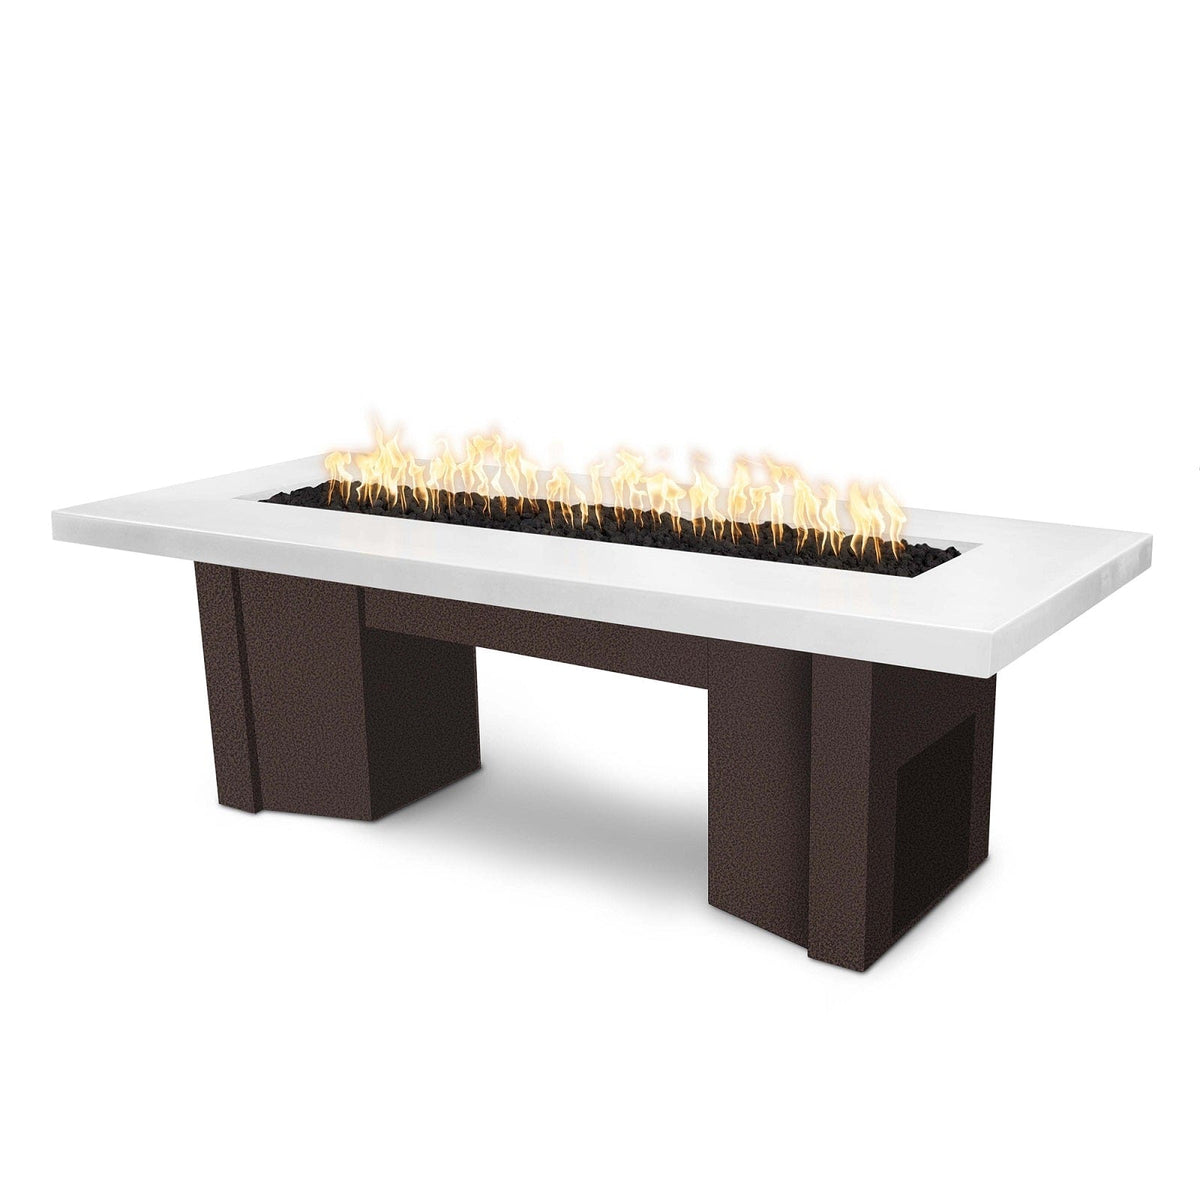 The Outdoor Plus Fire Features Limestone (-LIM) / Copper Vein Powder Coated Steel (-CPV) The Outdoor Plus 60&quot; Alameda Fire Table Smooth Concrete in Natural Gas - 12V Electronic Ignition / OPT-ALMGFRC60E12V-NG